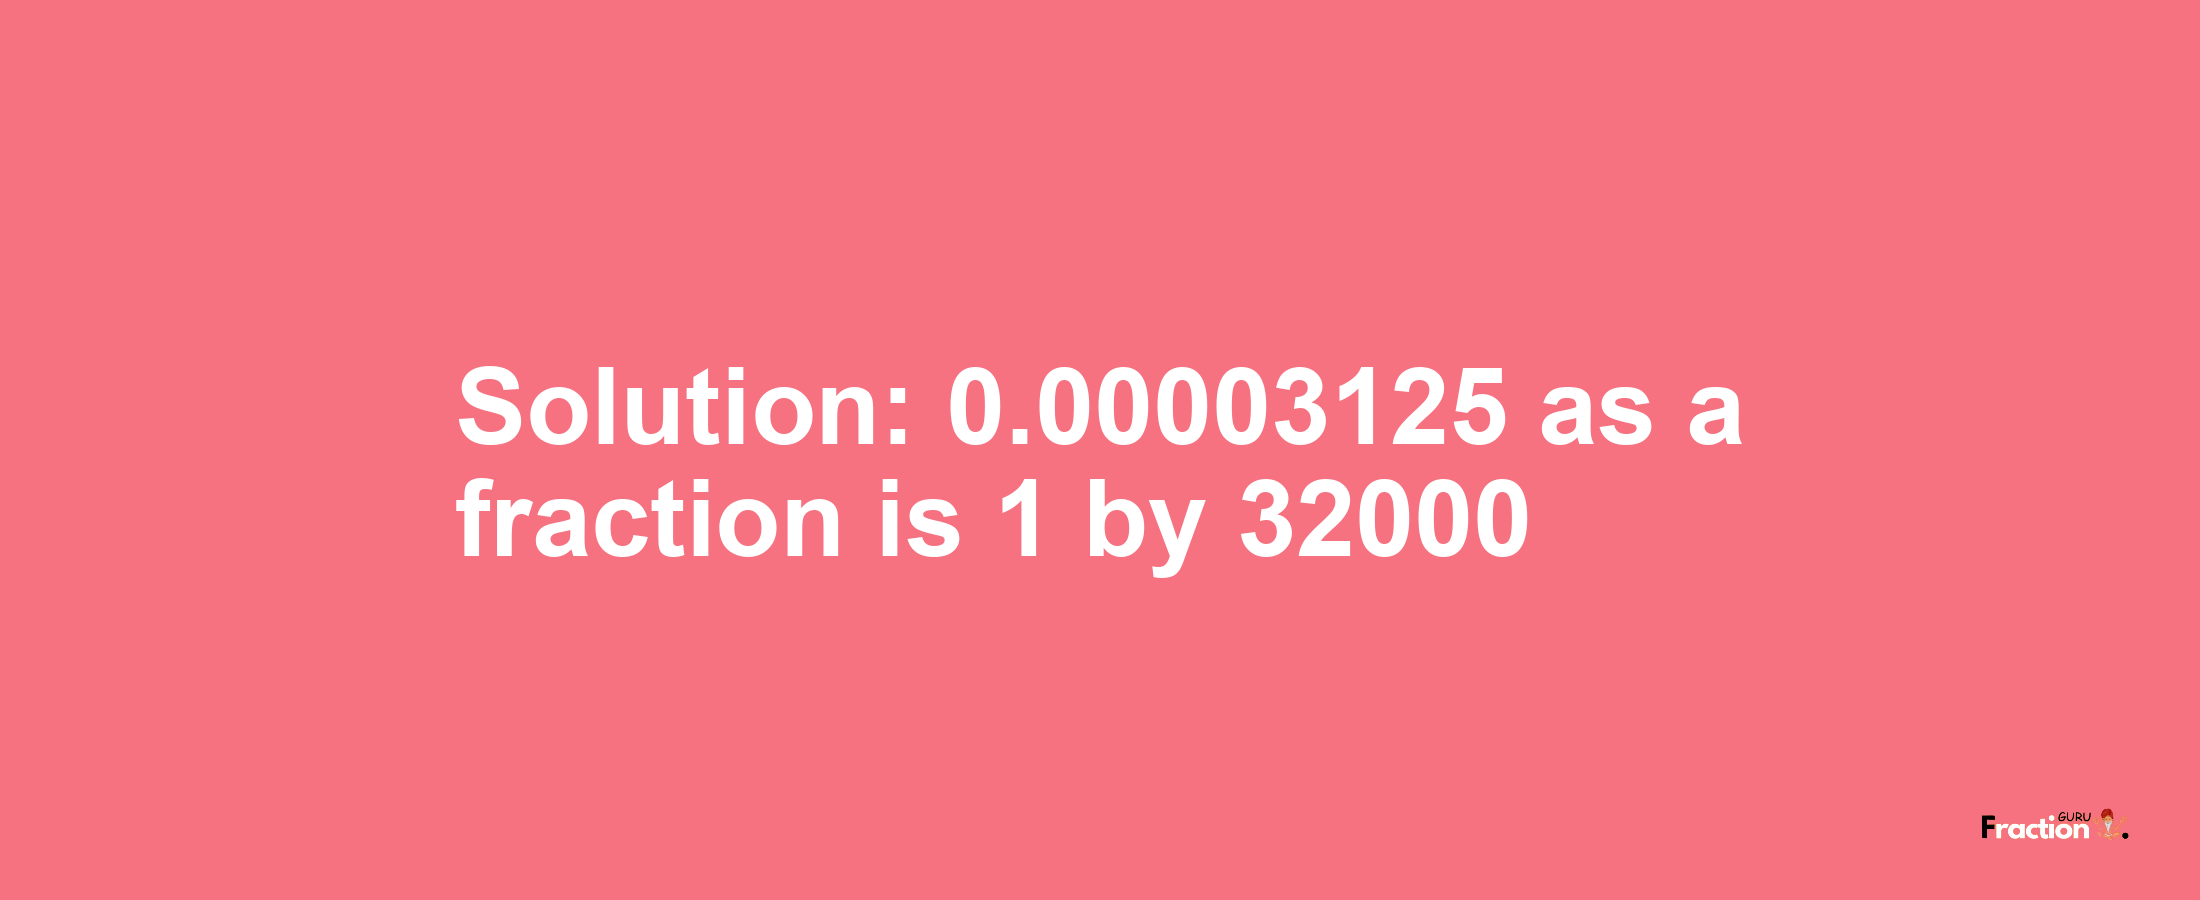 Solution:0.00003125 as a fraction is 1/32000